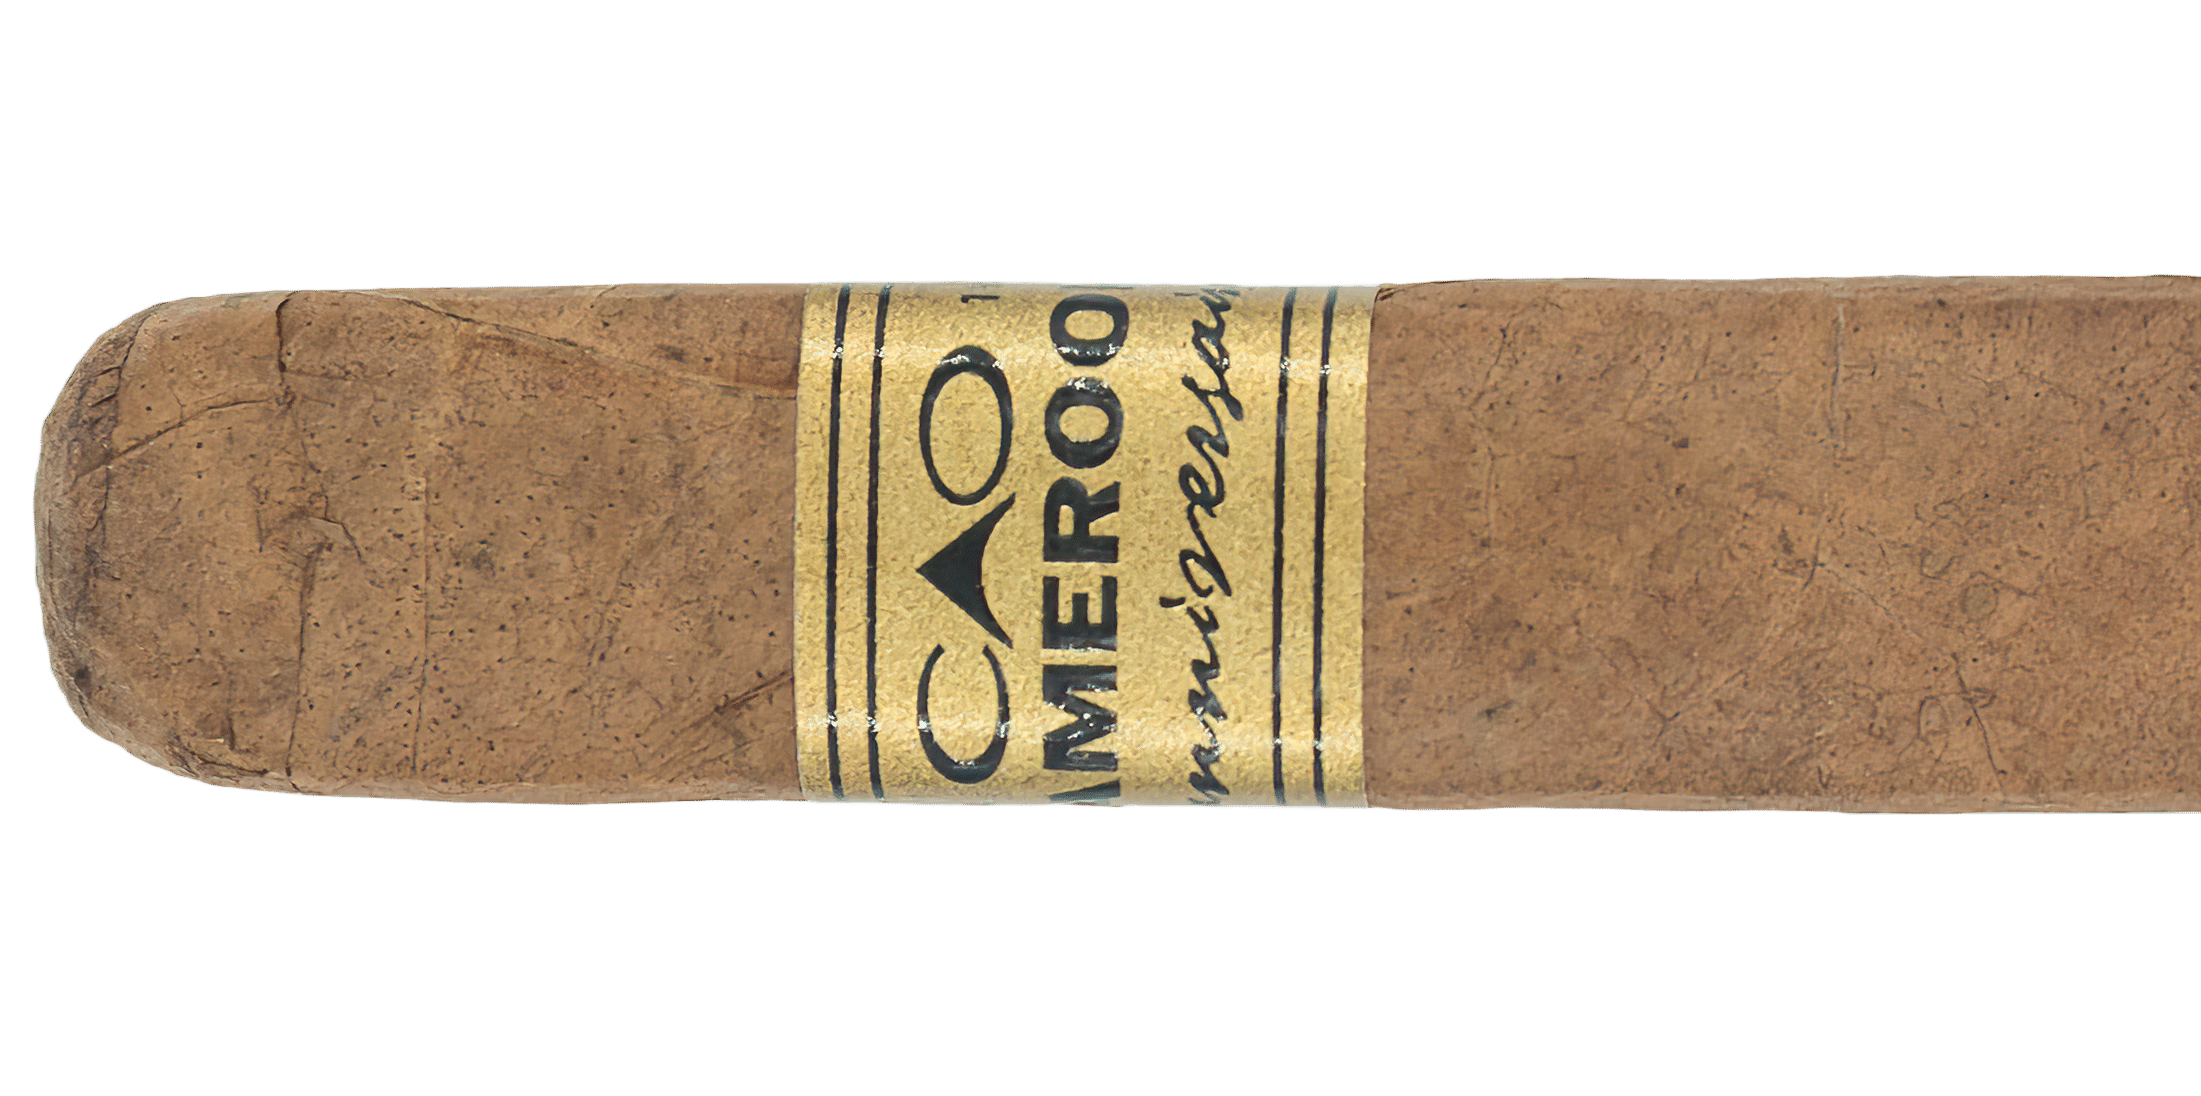 CAO Cameroon L’Anniversaire Robusto - Blind Cigar Review